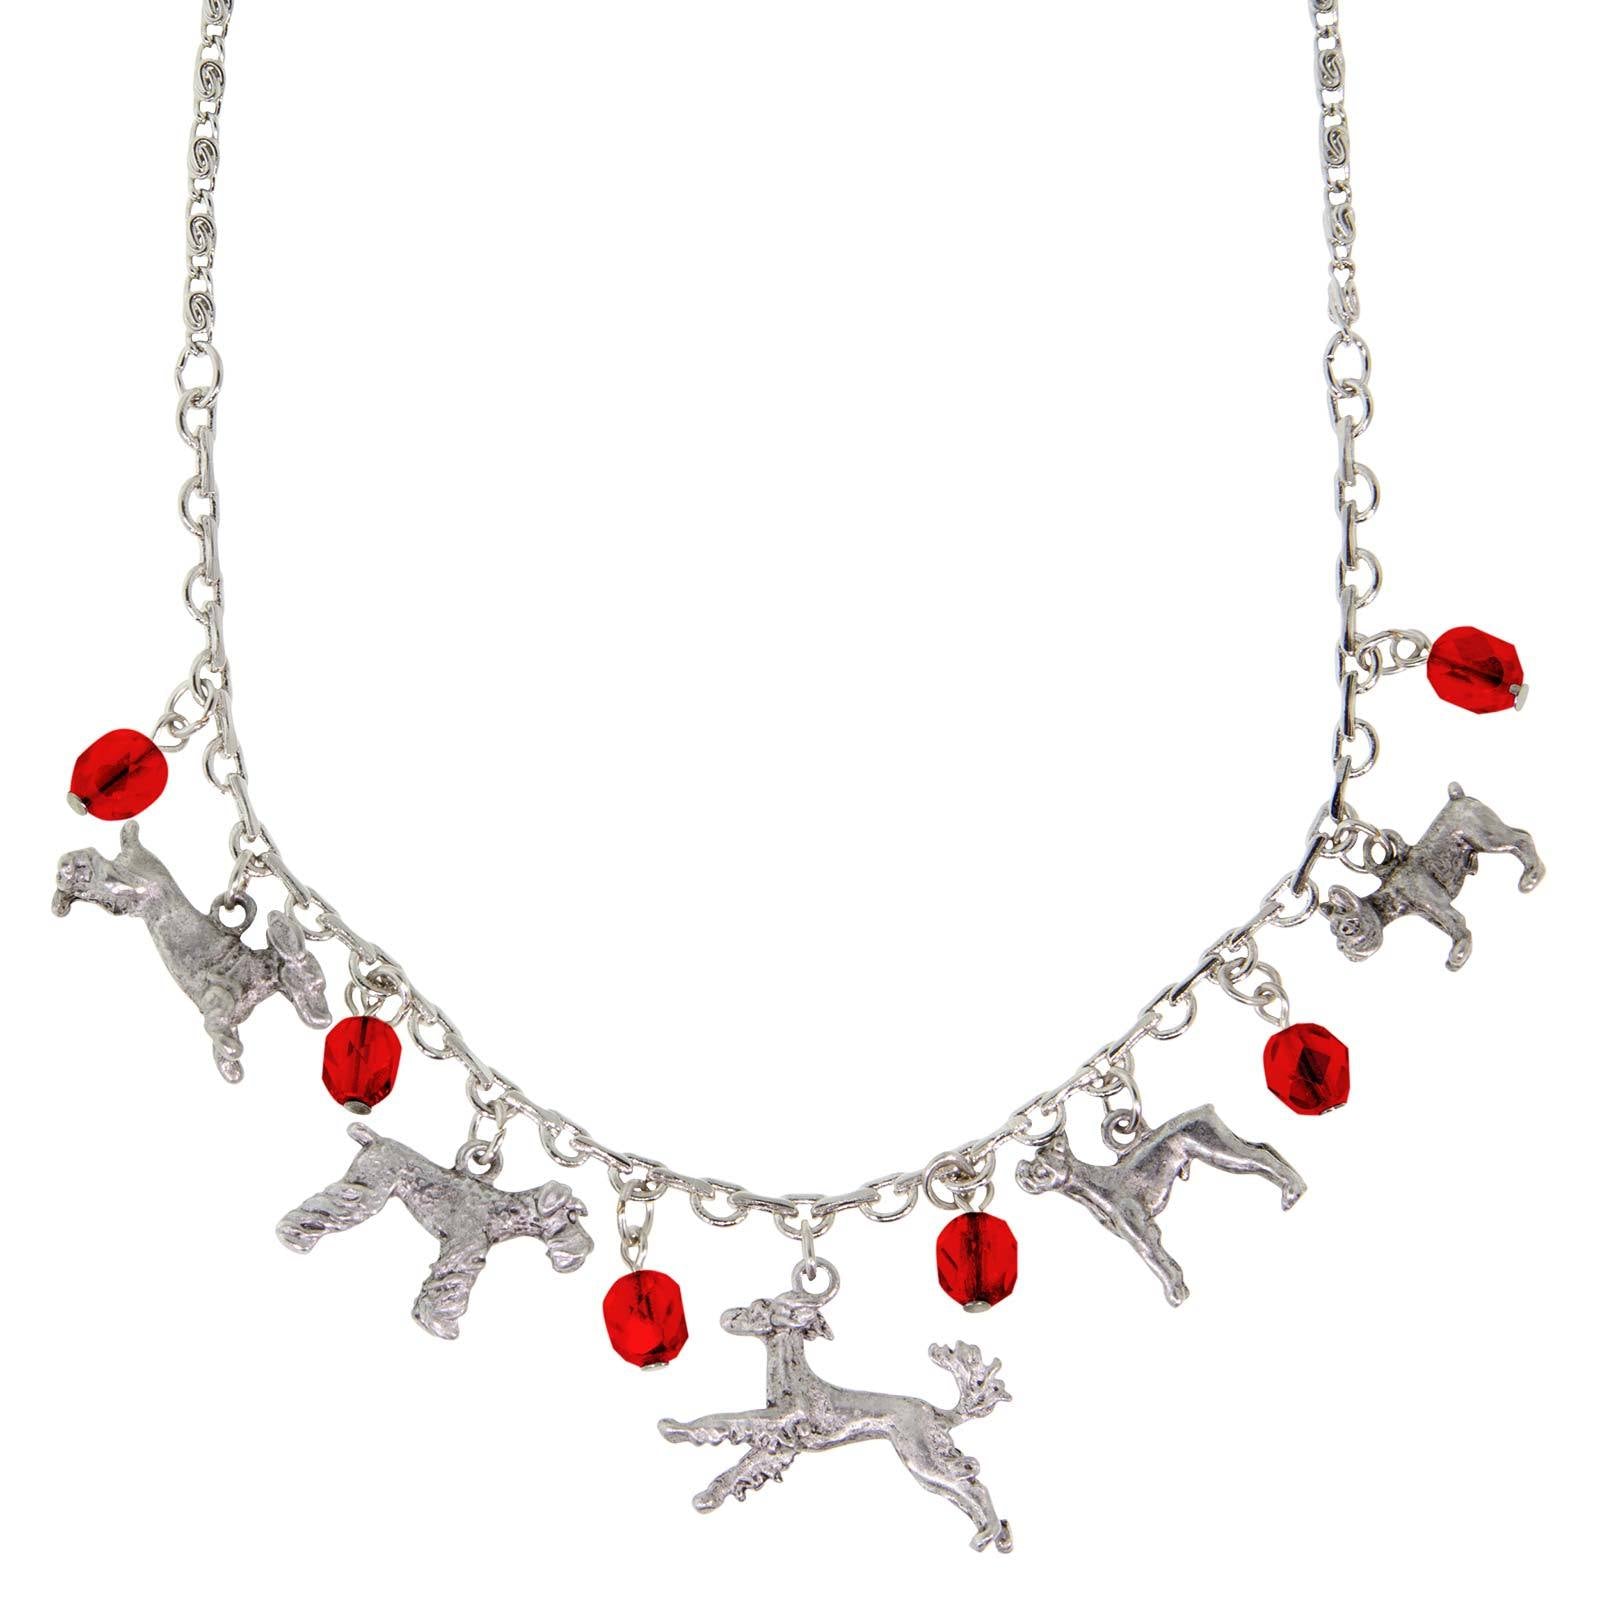 Silver Tone Red Crystal Beaded Multi Dog Drop Necklace 16 Adj.